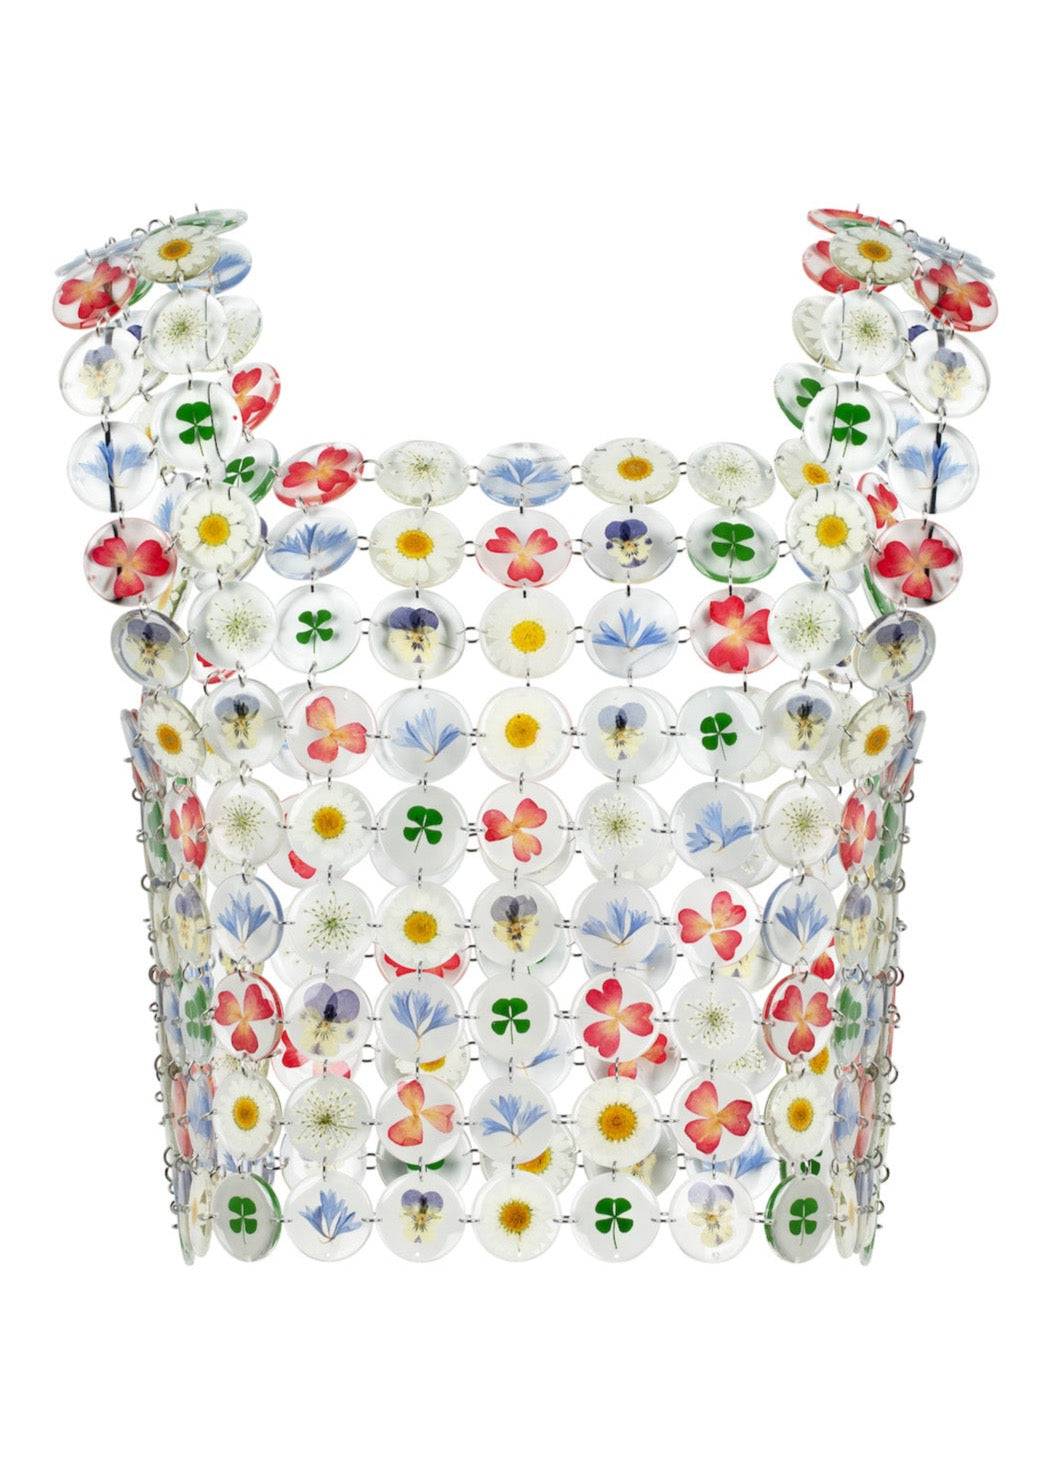 our new floral chainmaille is a distinctive technique where hundreds of preserved botanicals are intricately assembled-- this top is crafted from over two hundred flowers and leaves. Relaxed fit, antiqued silver toggle side closure for easy on/off. 